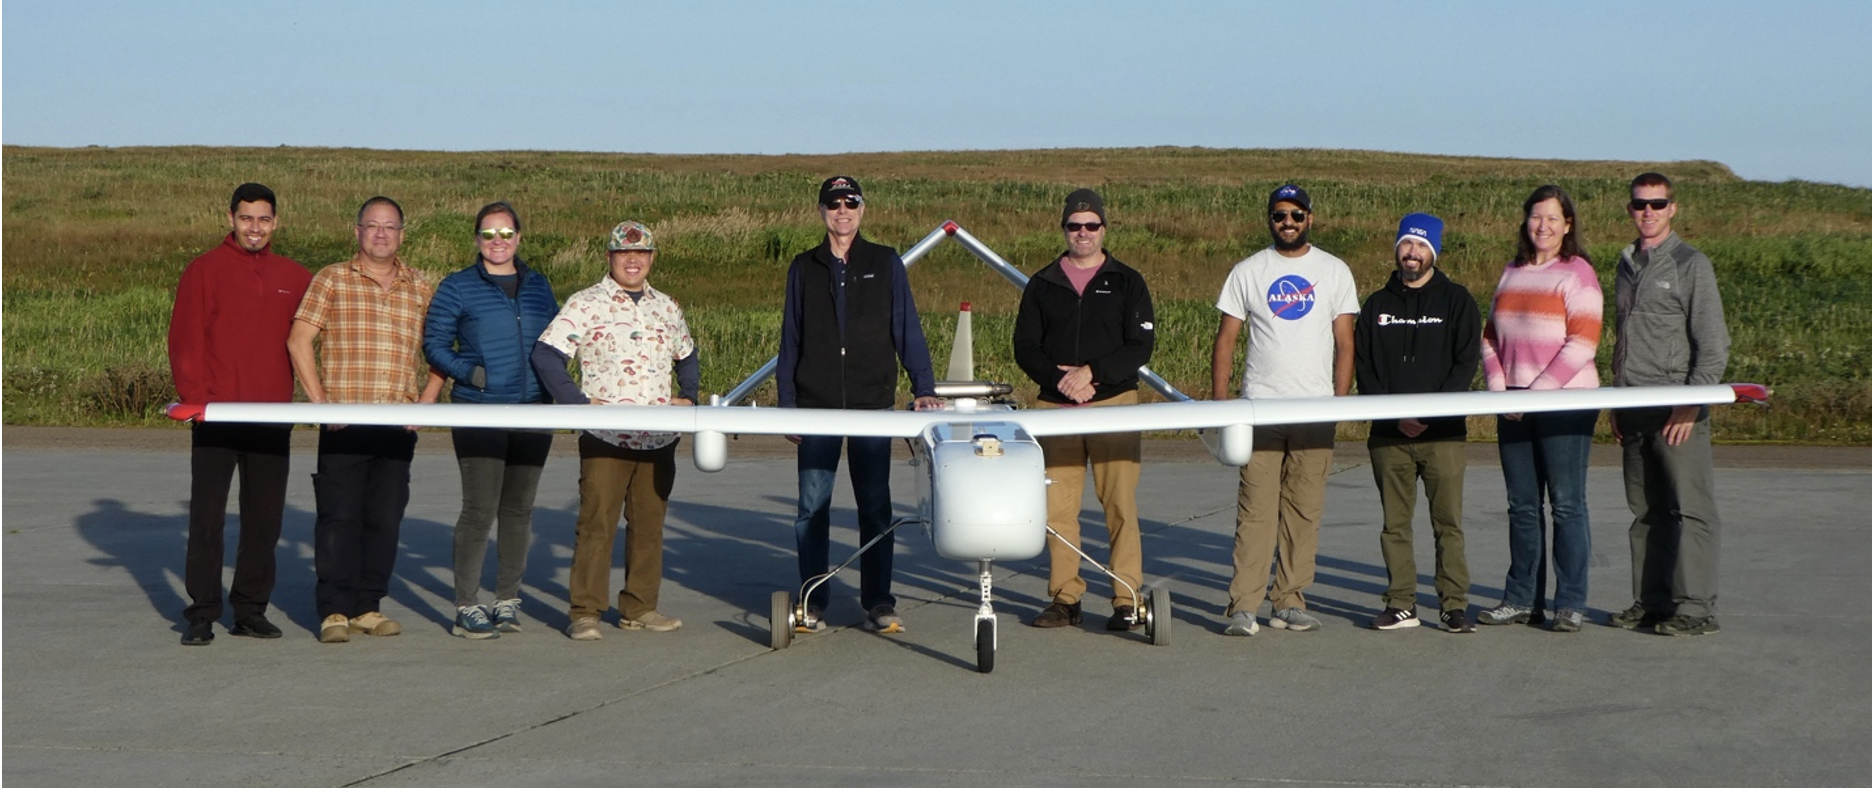 NASA-NOAA field team after completing a successful series of Beyond Visual Line of Sight science flights in Alaska's Aleutian islands